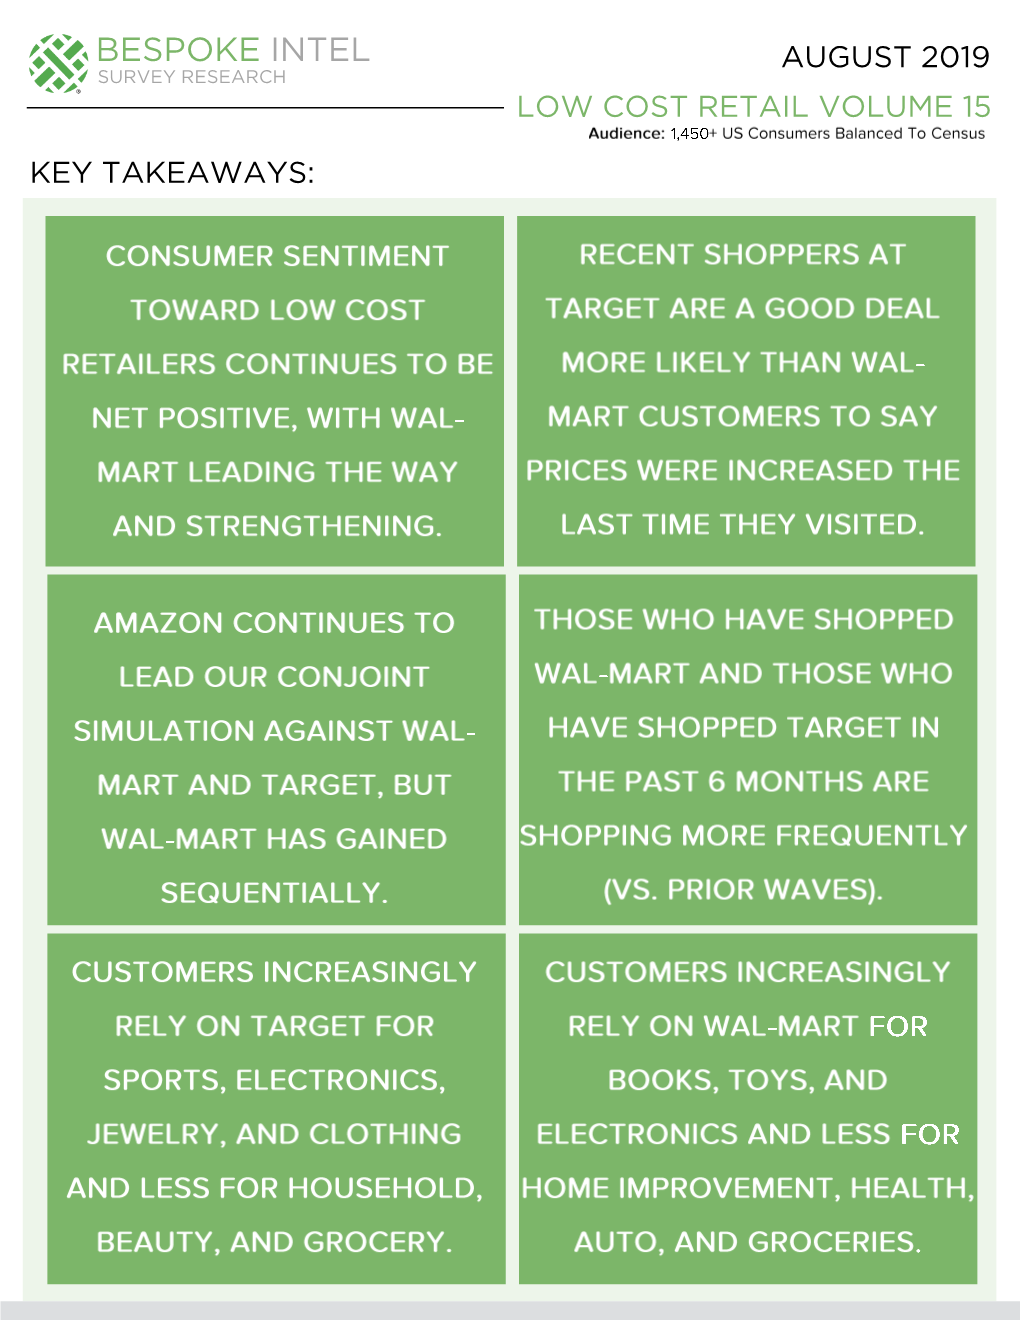 Bespoke Intel August 2019 Survey Research Low Cost Retail Volume 15